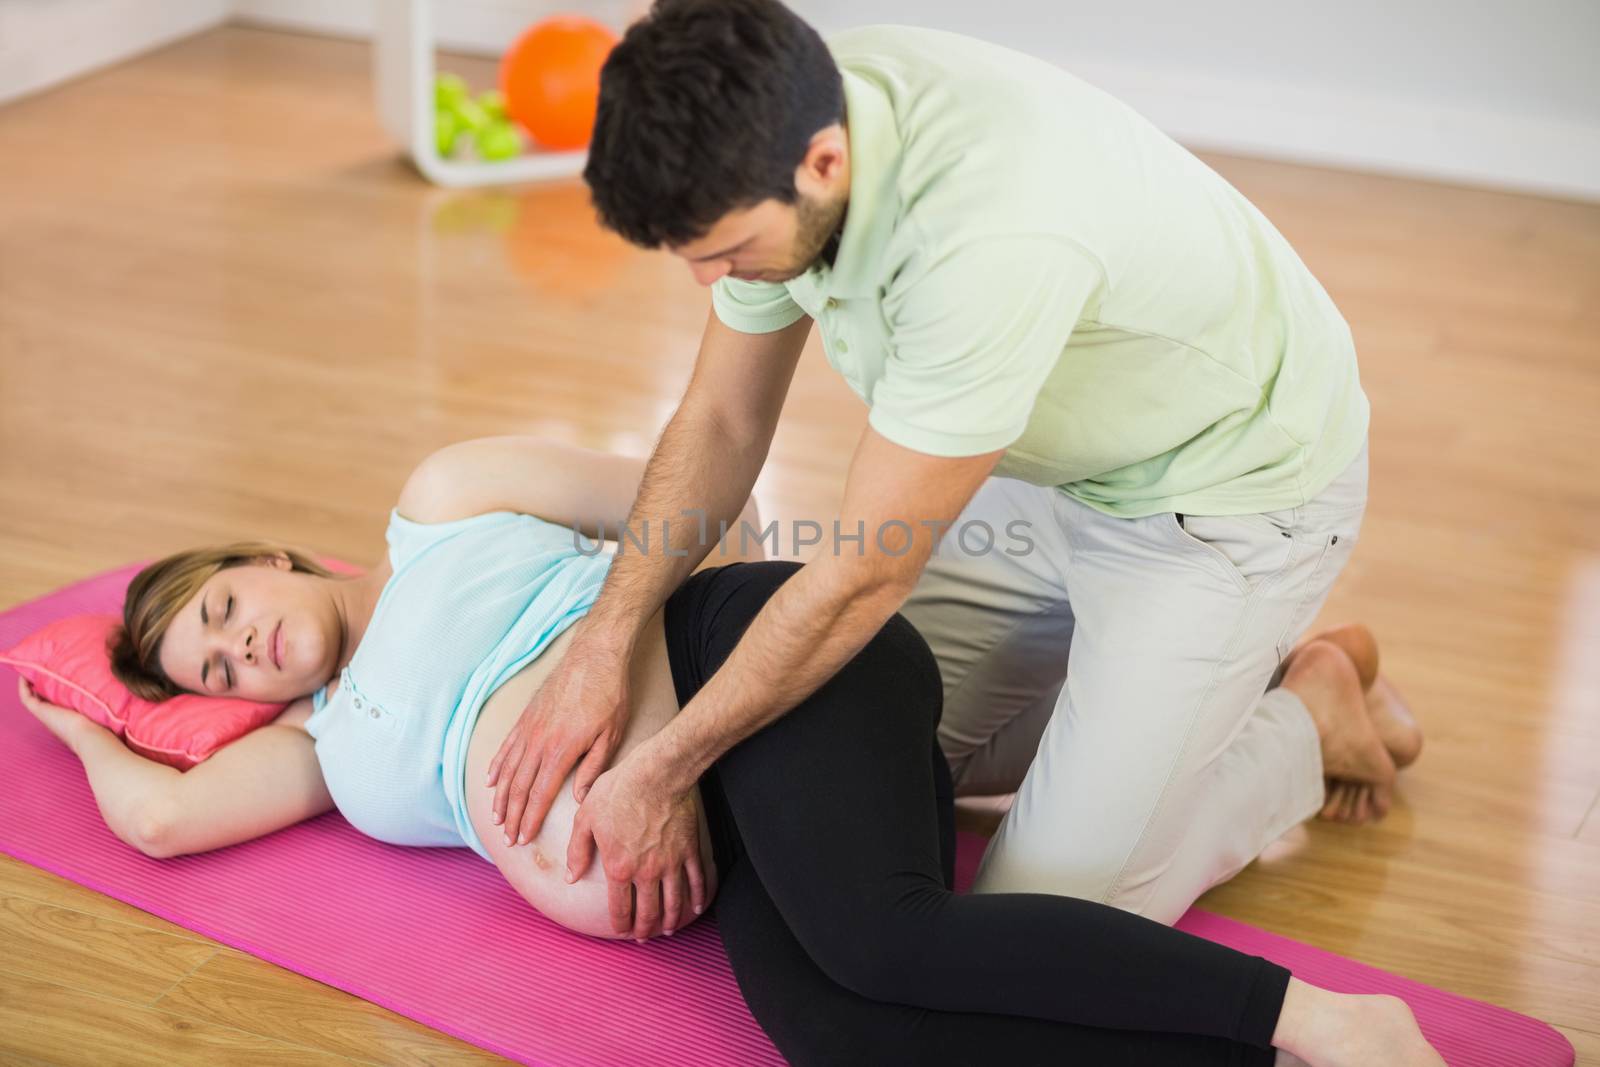 Pregnant woman getting massage for pregnant belly by Wavebreakmedia